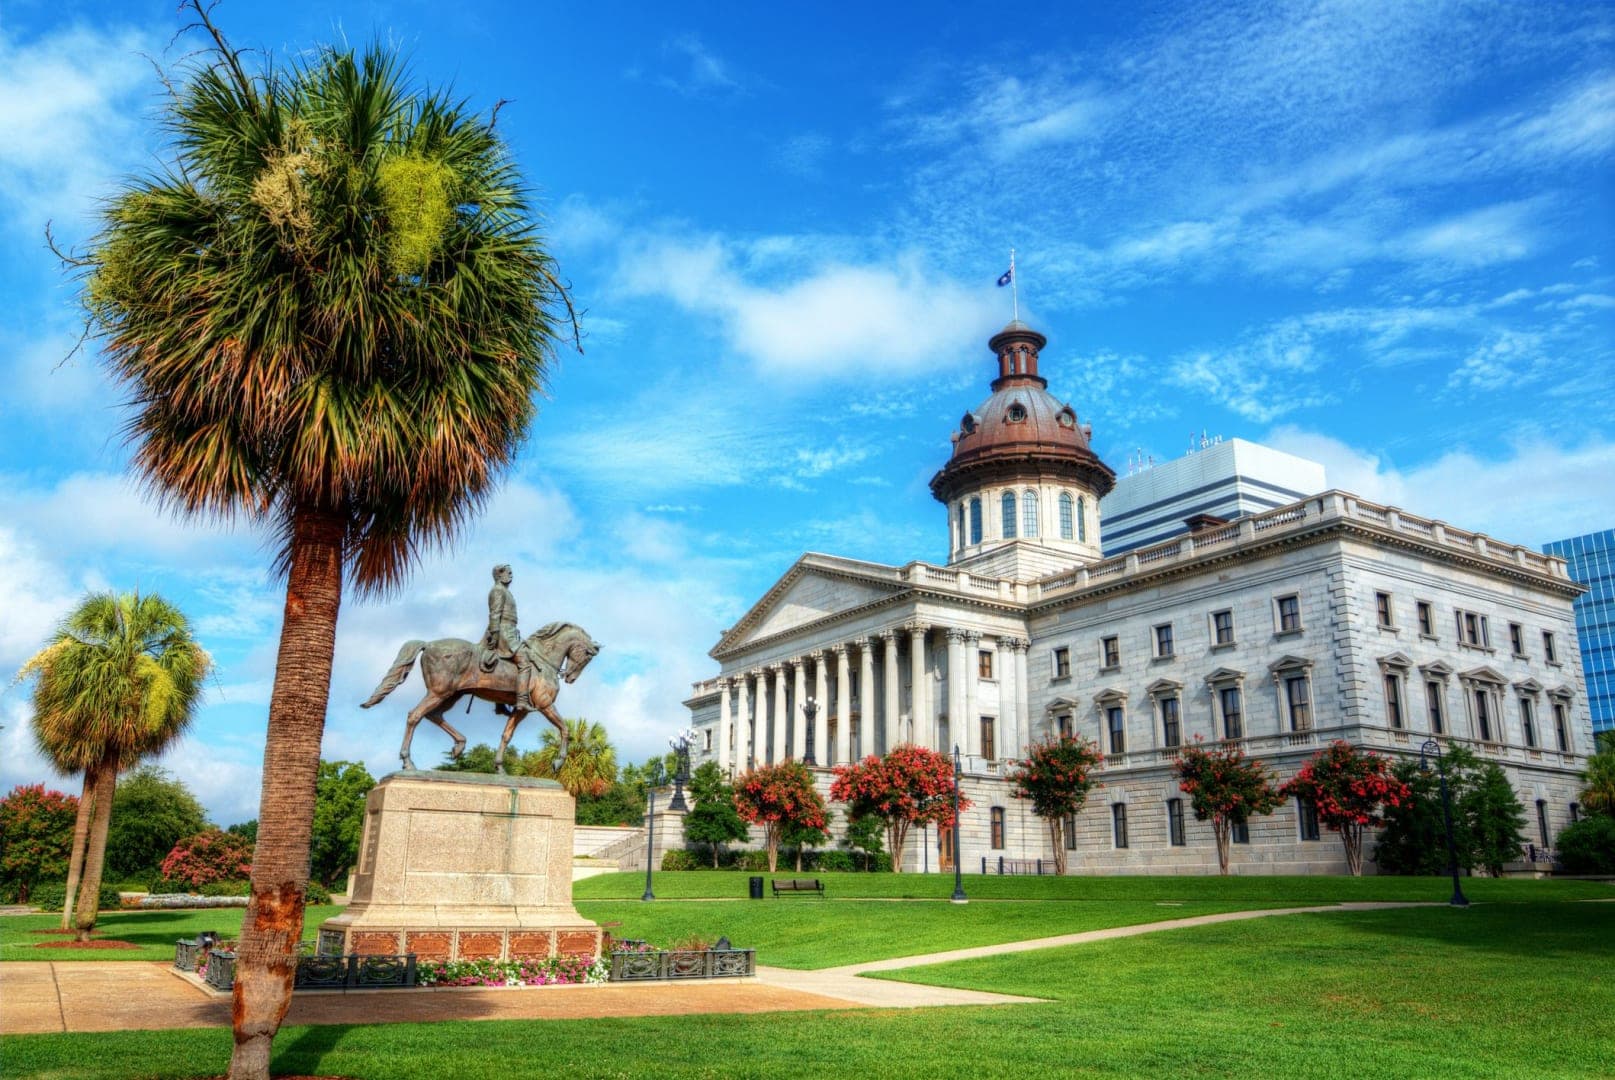 South Carolina introduces bill to make asking vaccine status illegal